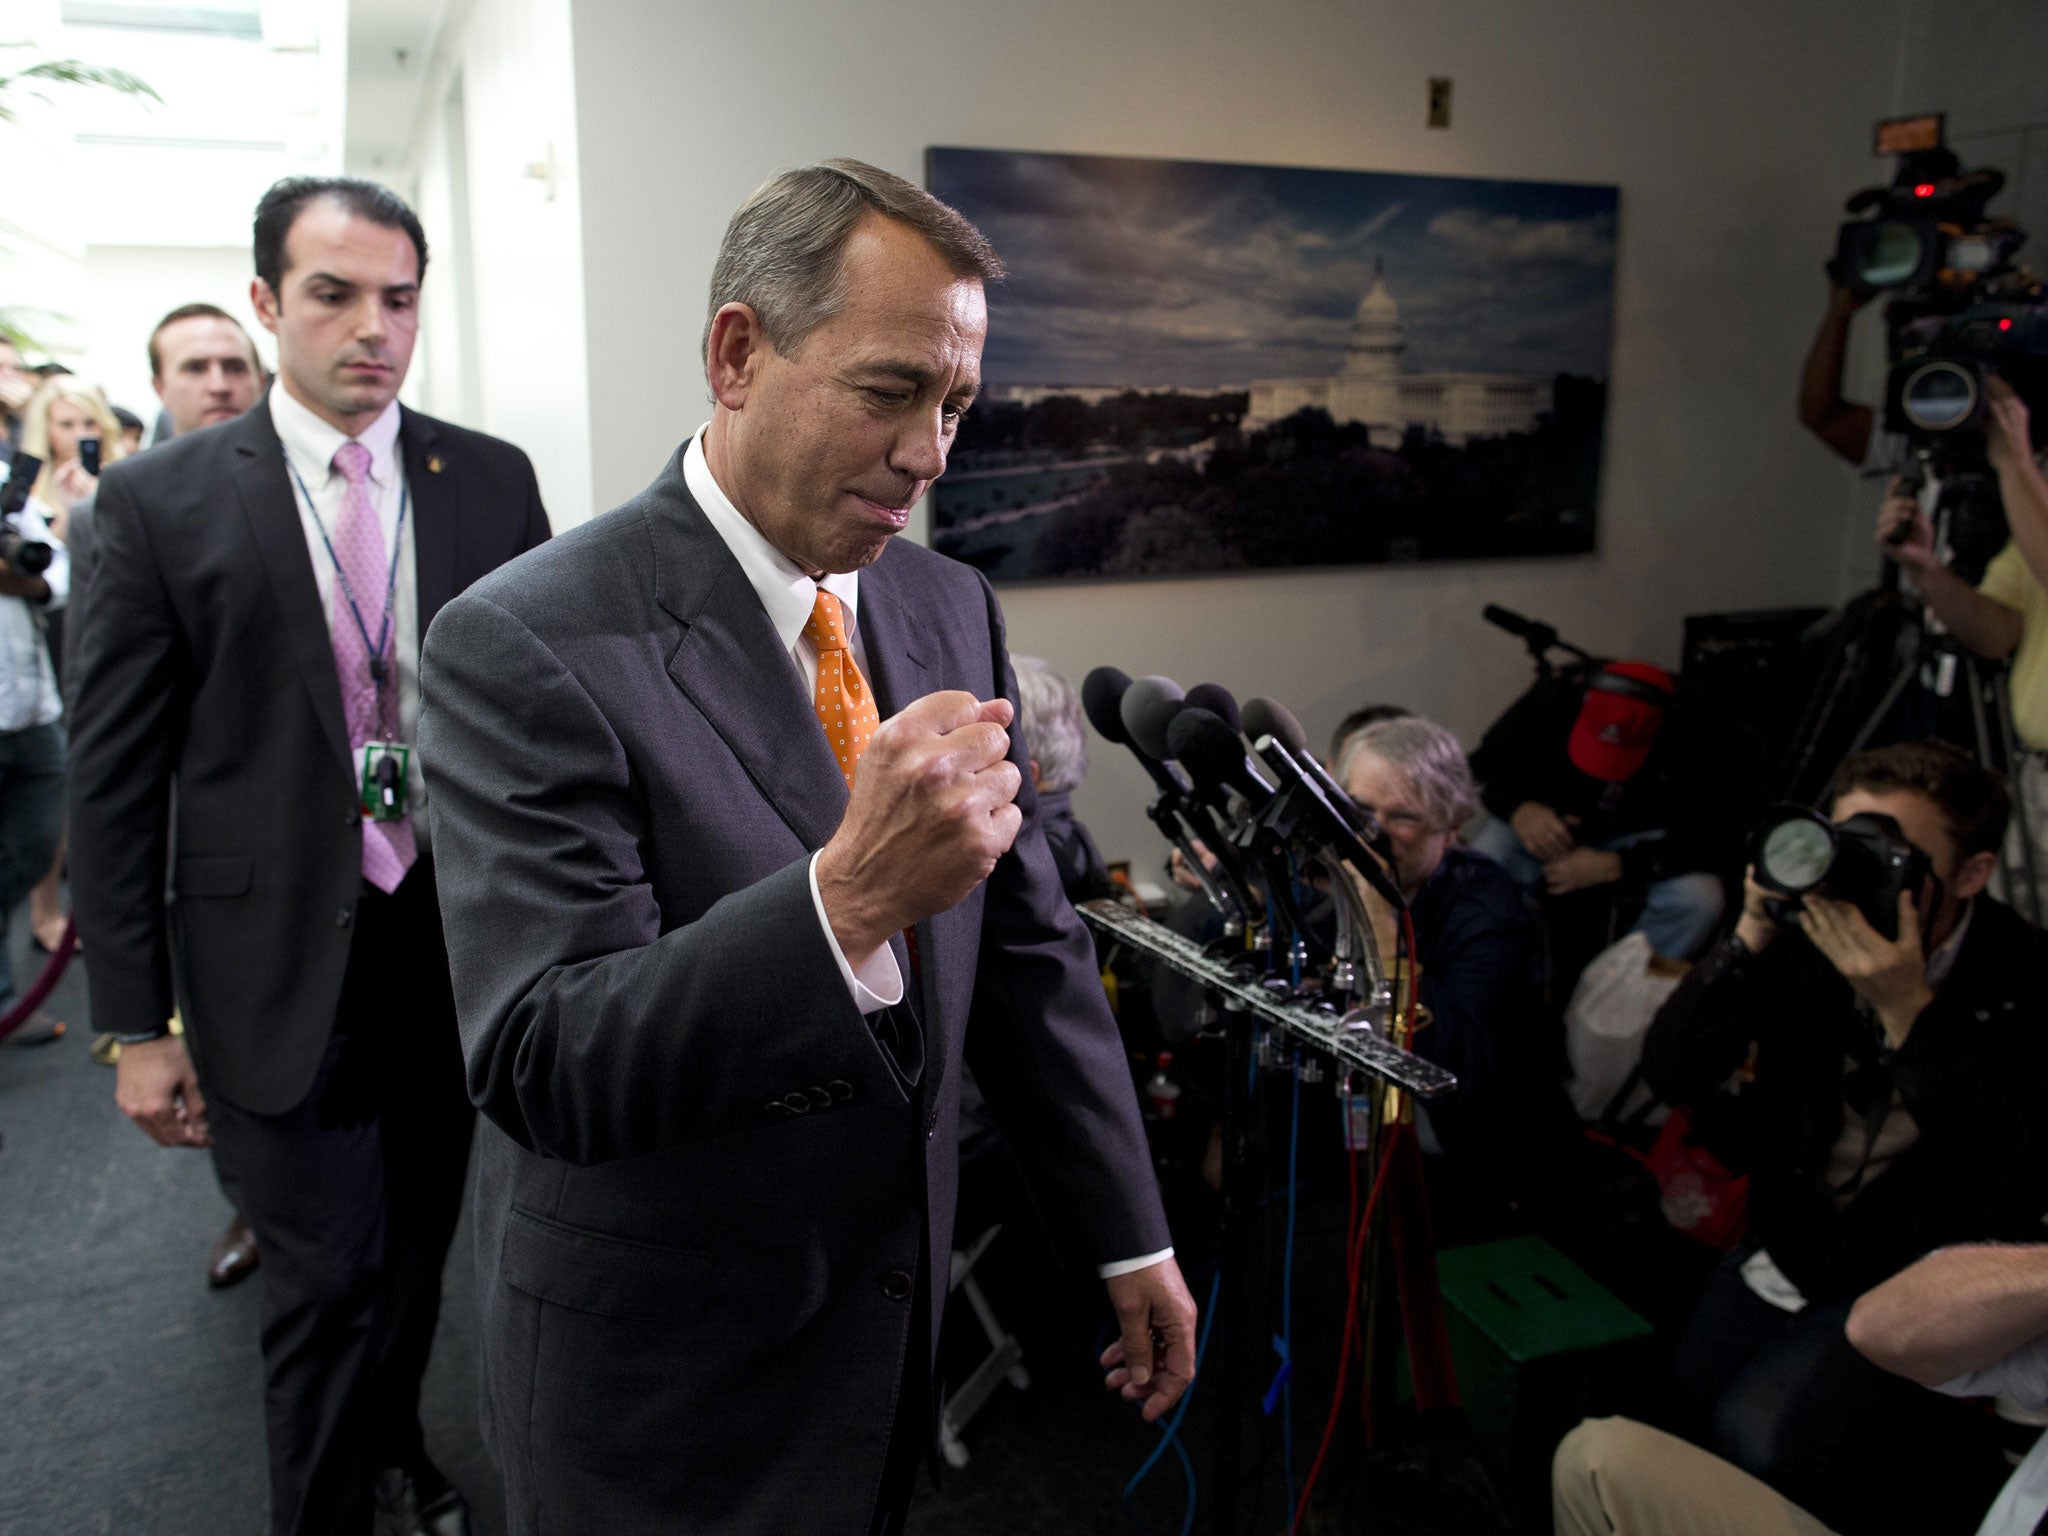 Speaker of the House Rep. John Boehner, R-Ohio, pumps his fist as he walks past reporters after a meeting with House Republicans